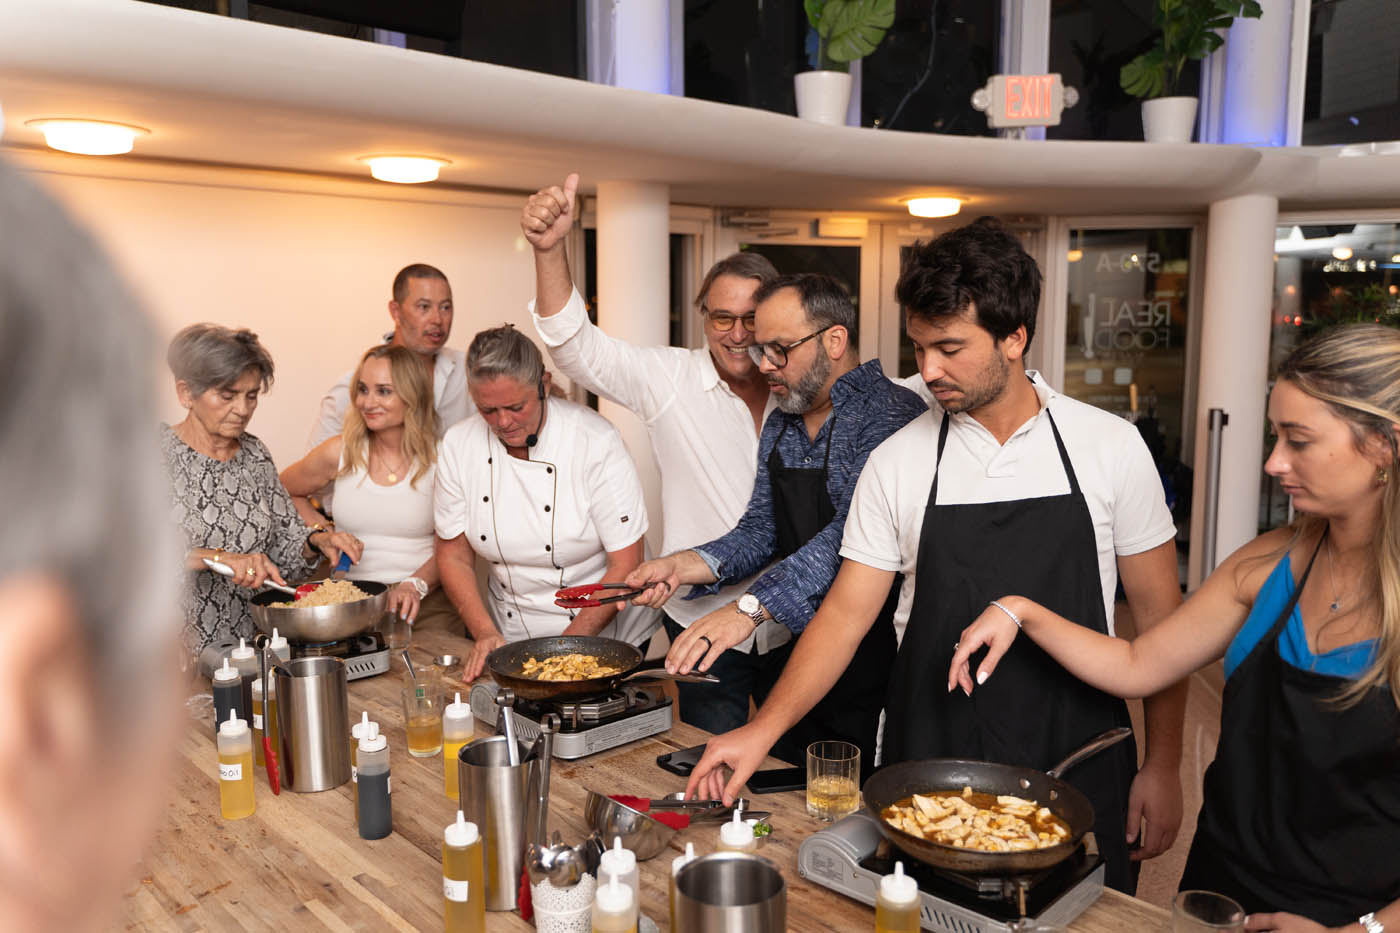 A chef leading one of The Real Food Academy's corporate team building cooking classes in Miami, FL.